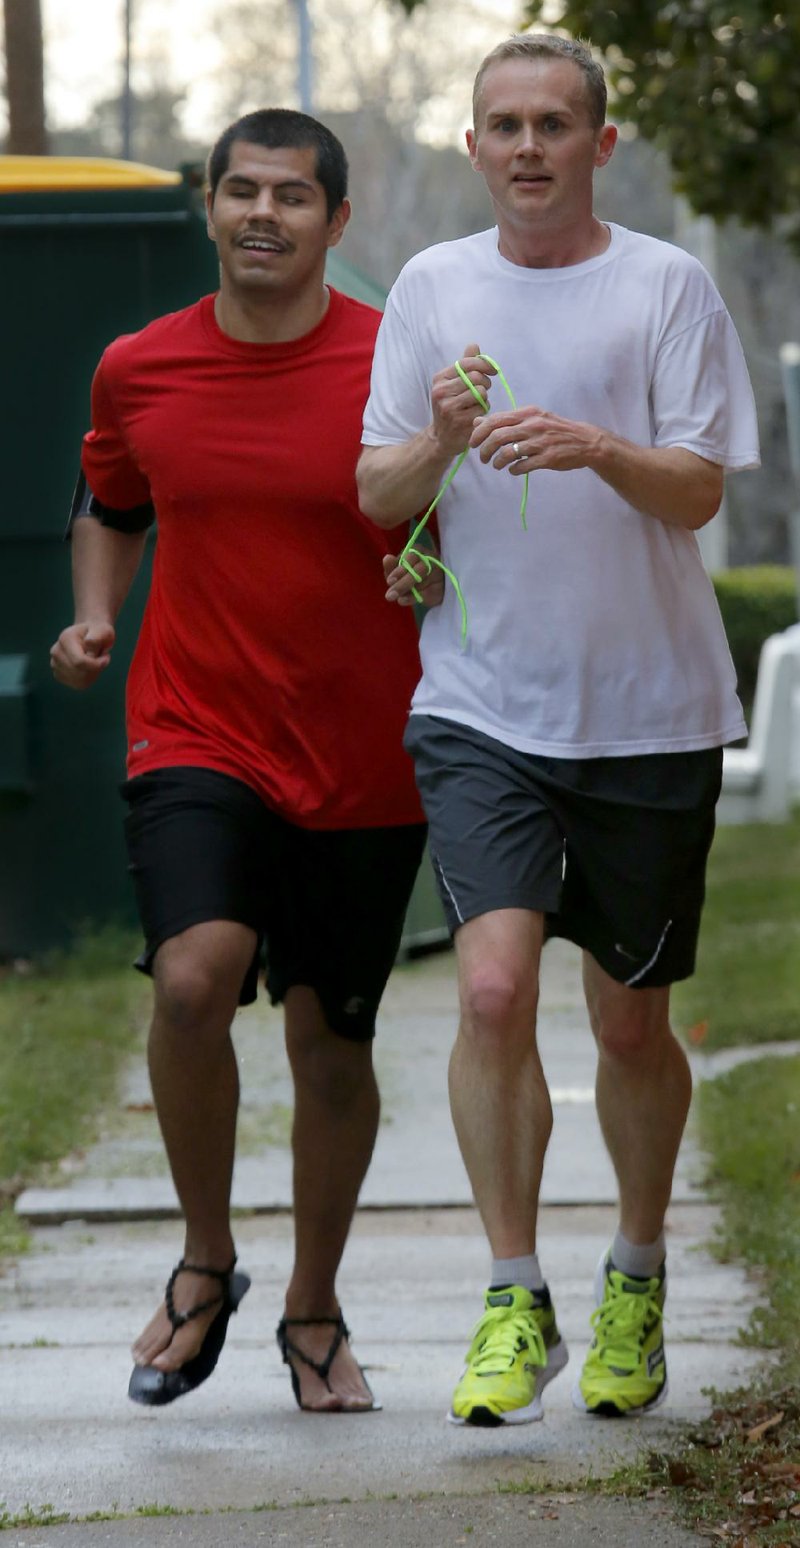 Arkansas Democrat-Gazette/JOHN SYKES JR. - Blind runner Gustavo Manzanales of Little Rock, (left) who is a rehabilitation counselor with Arkansas Department of Human Services and Chris Baldwin of Little Rock use a tether while running together. Baldwin was Manzanales' volunteer guide.